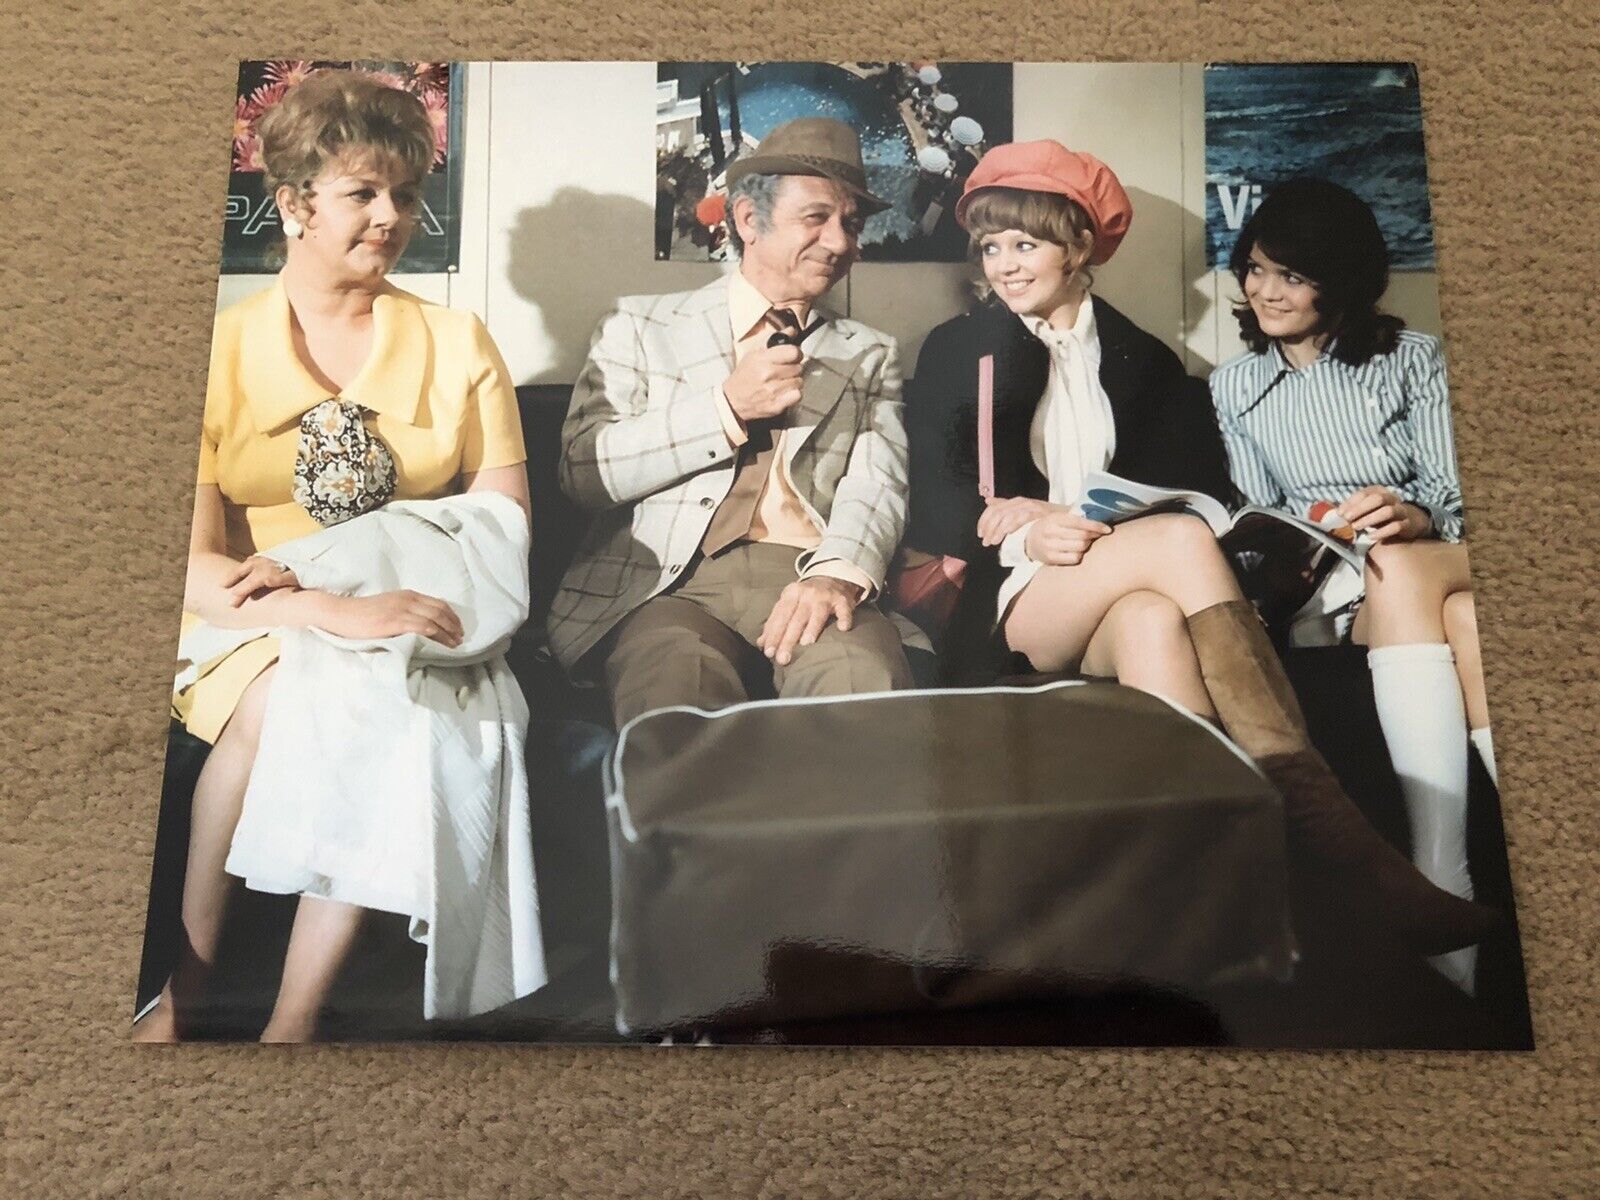 SID JAMES & JOAN SIMS (CARRY ON) UNSIGNED Photo Poster painting 10x8”